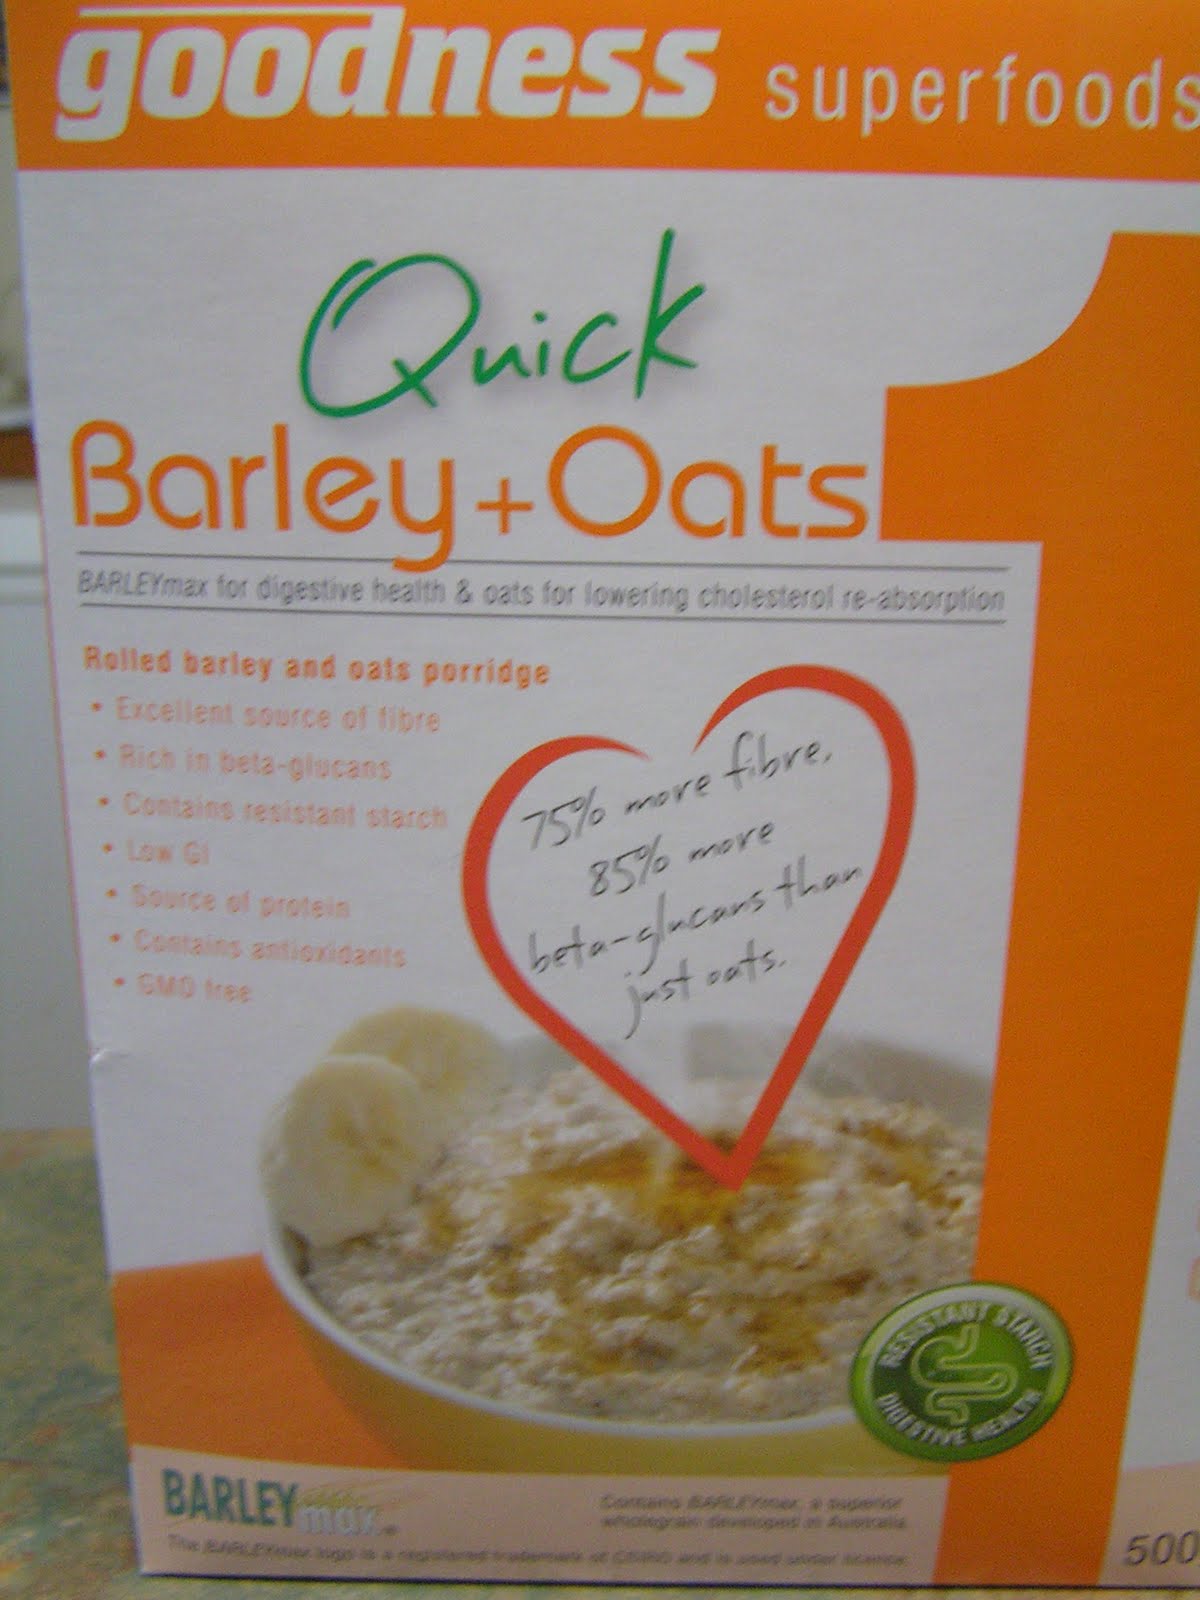 Charlotte Orr: Quick Barley & Oats review